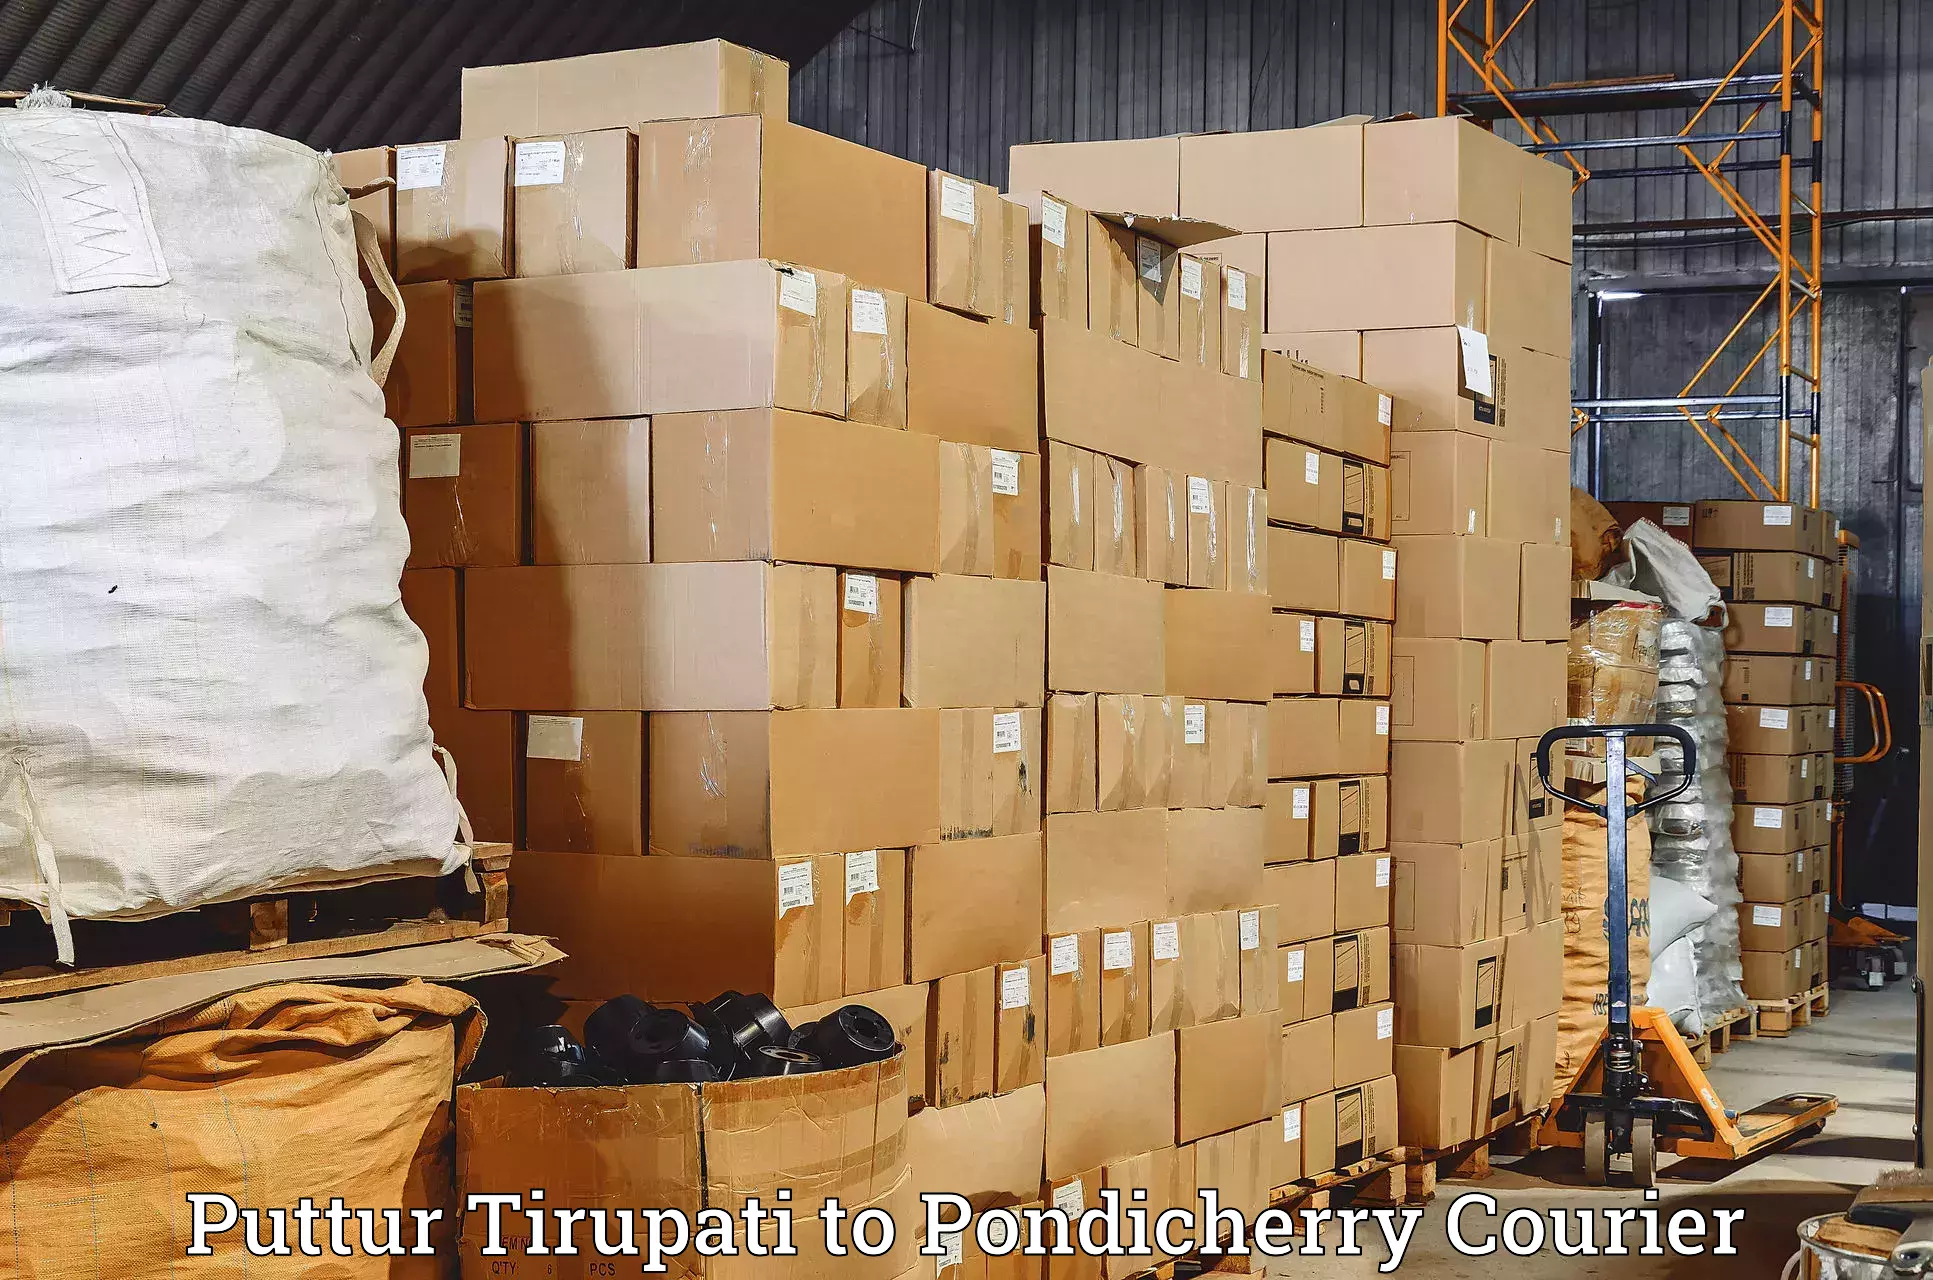 Express delivery capabilities in Puttur Tirupati to Metttupalayam